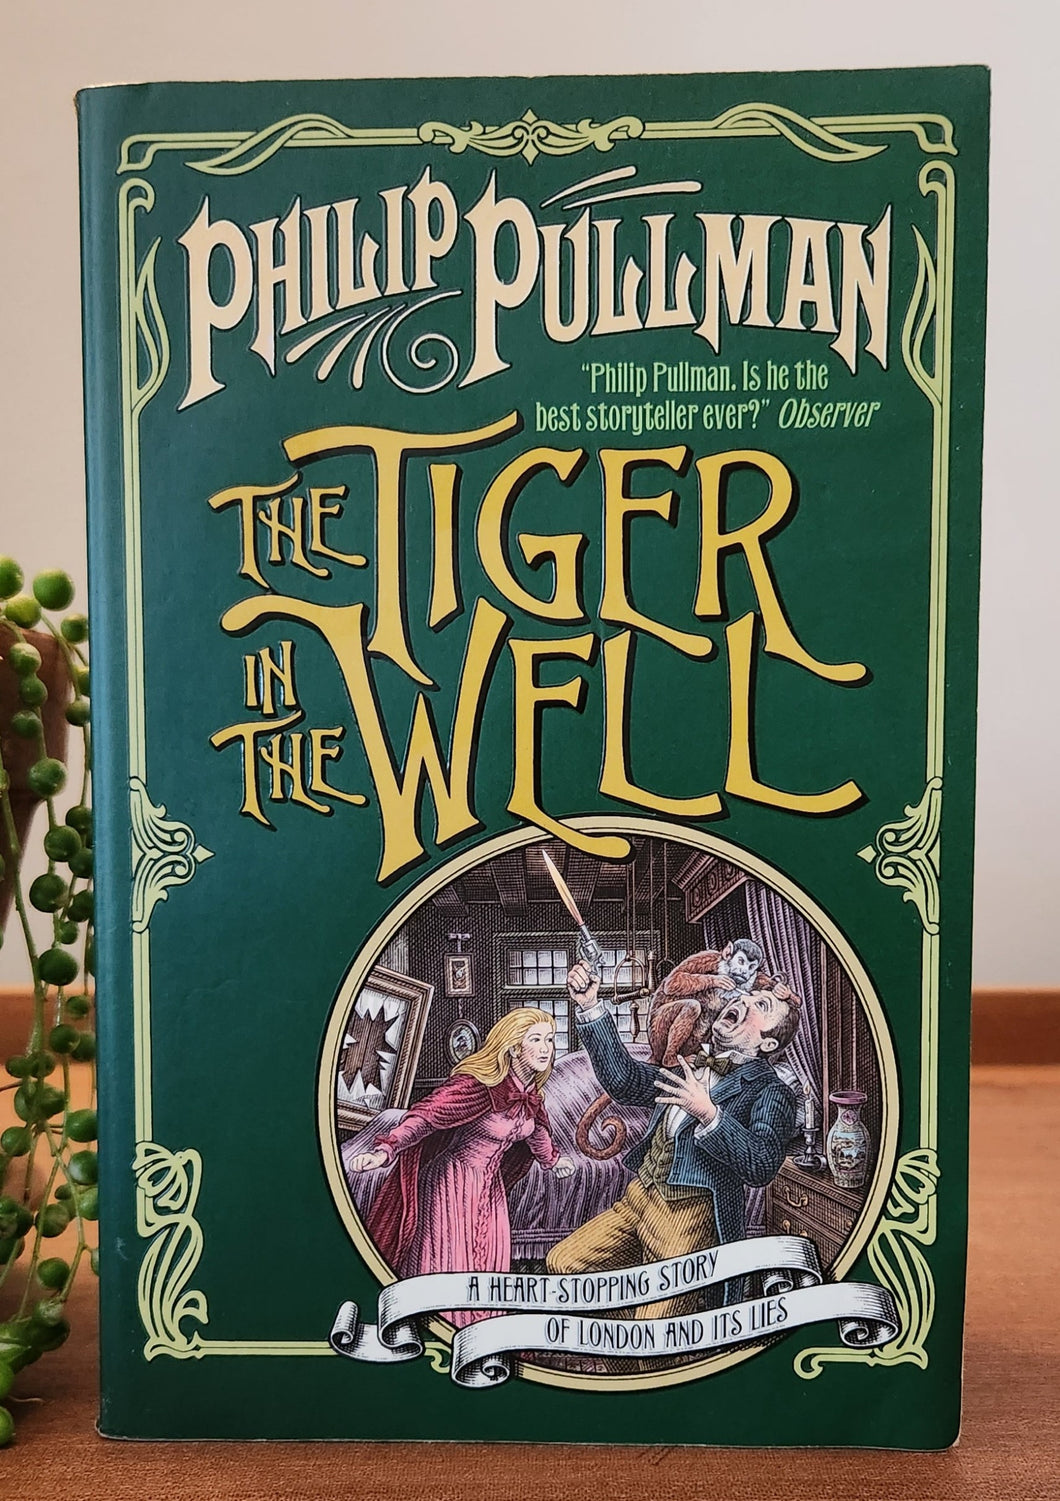 The Tiger in the Well by Philip Pullman